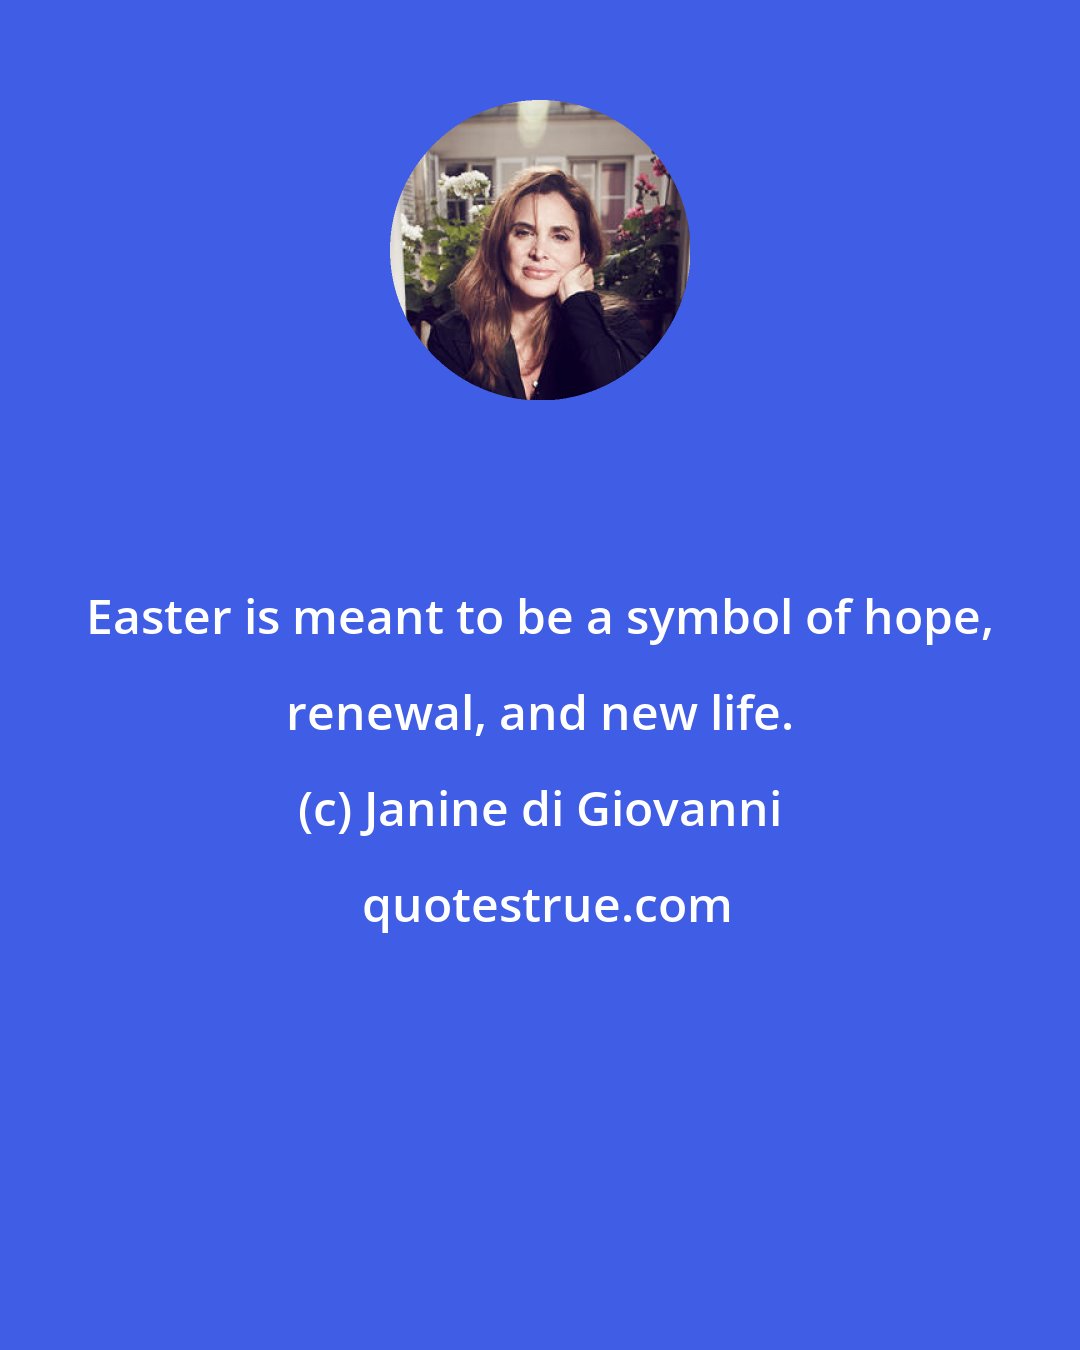 Janine di Giovanni: Easter is meant to be a symbol of hope, renewal, and new life.